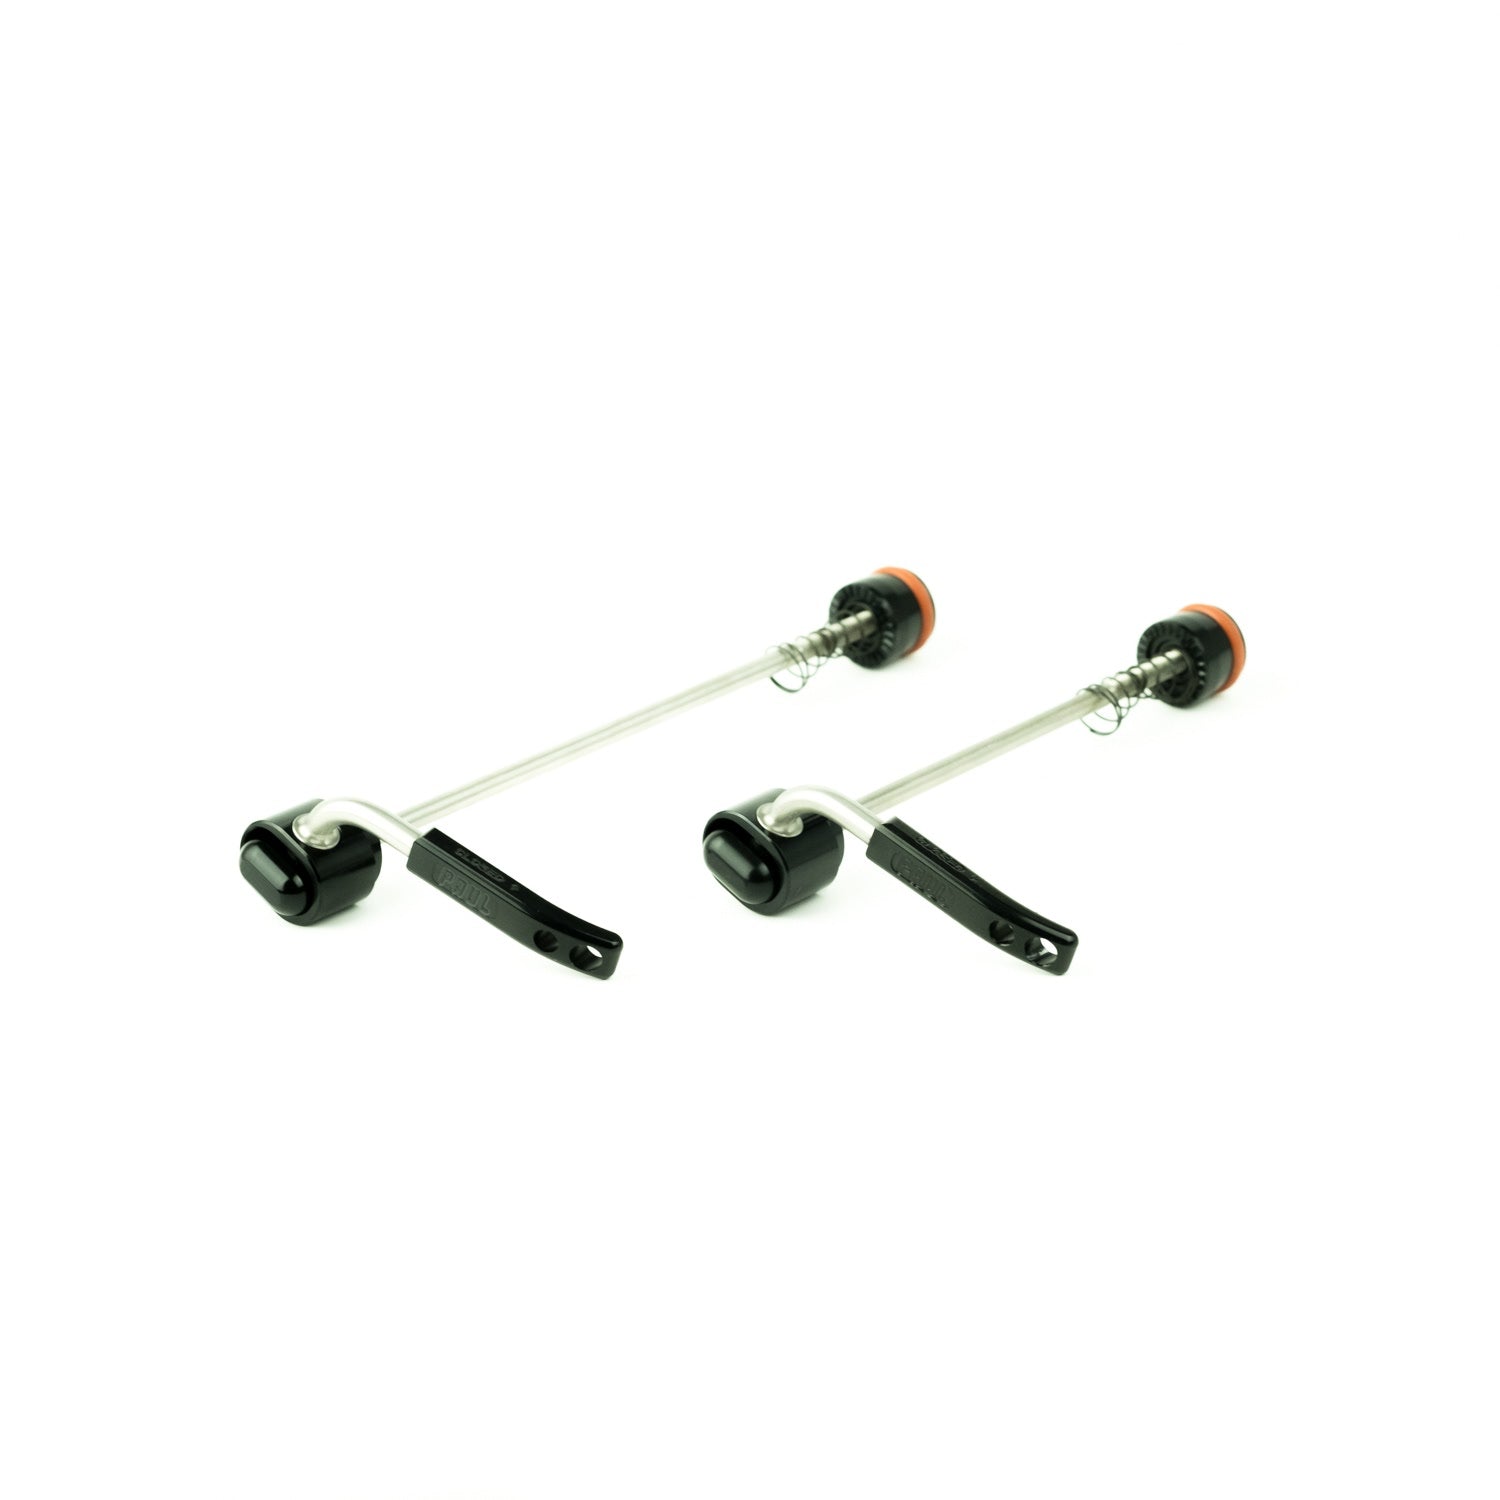 PAUL COMPONENT Quick Release Skewers